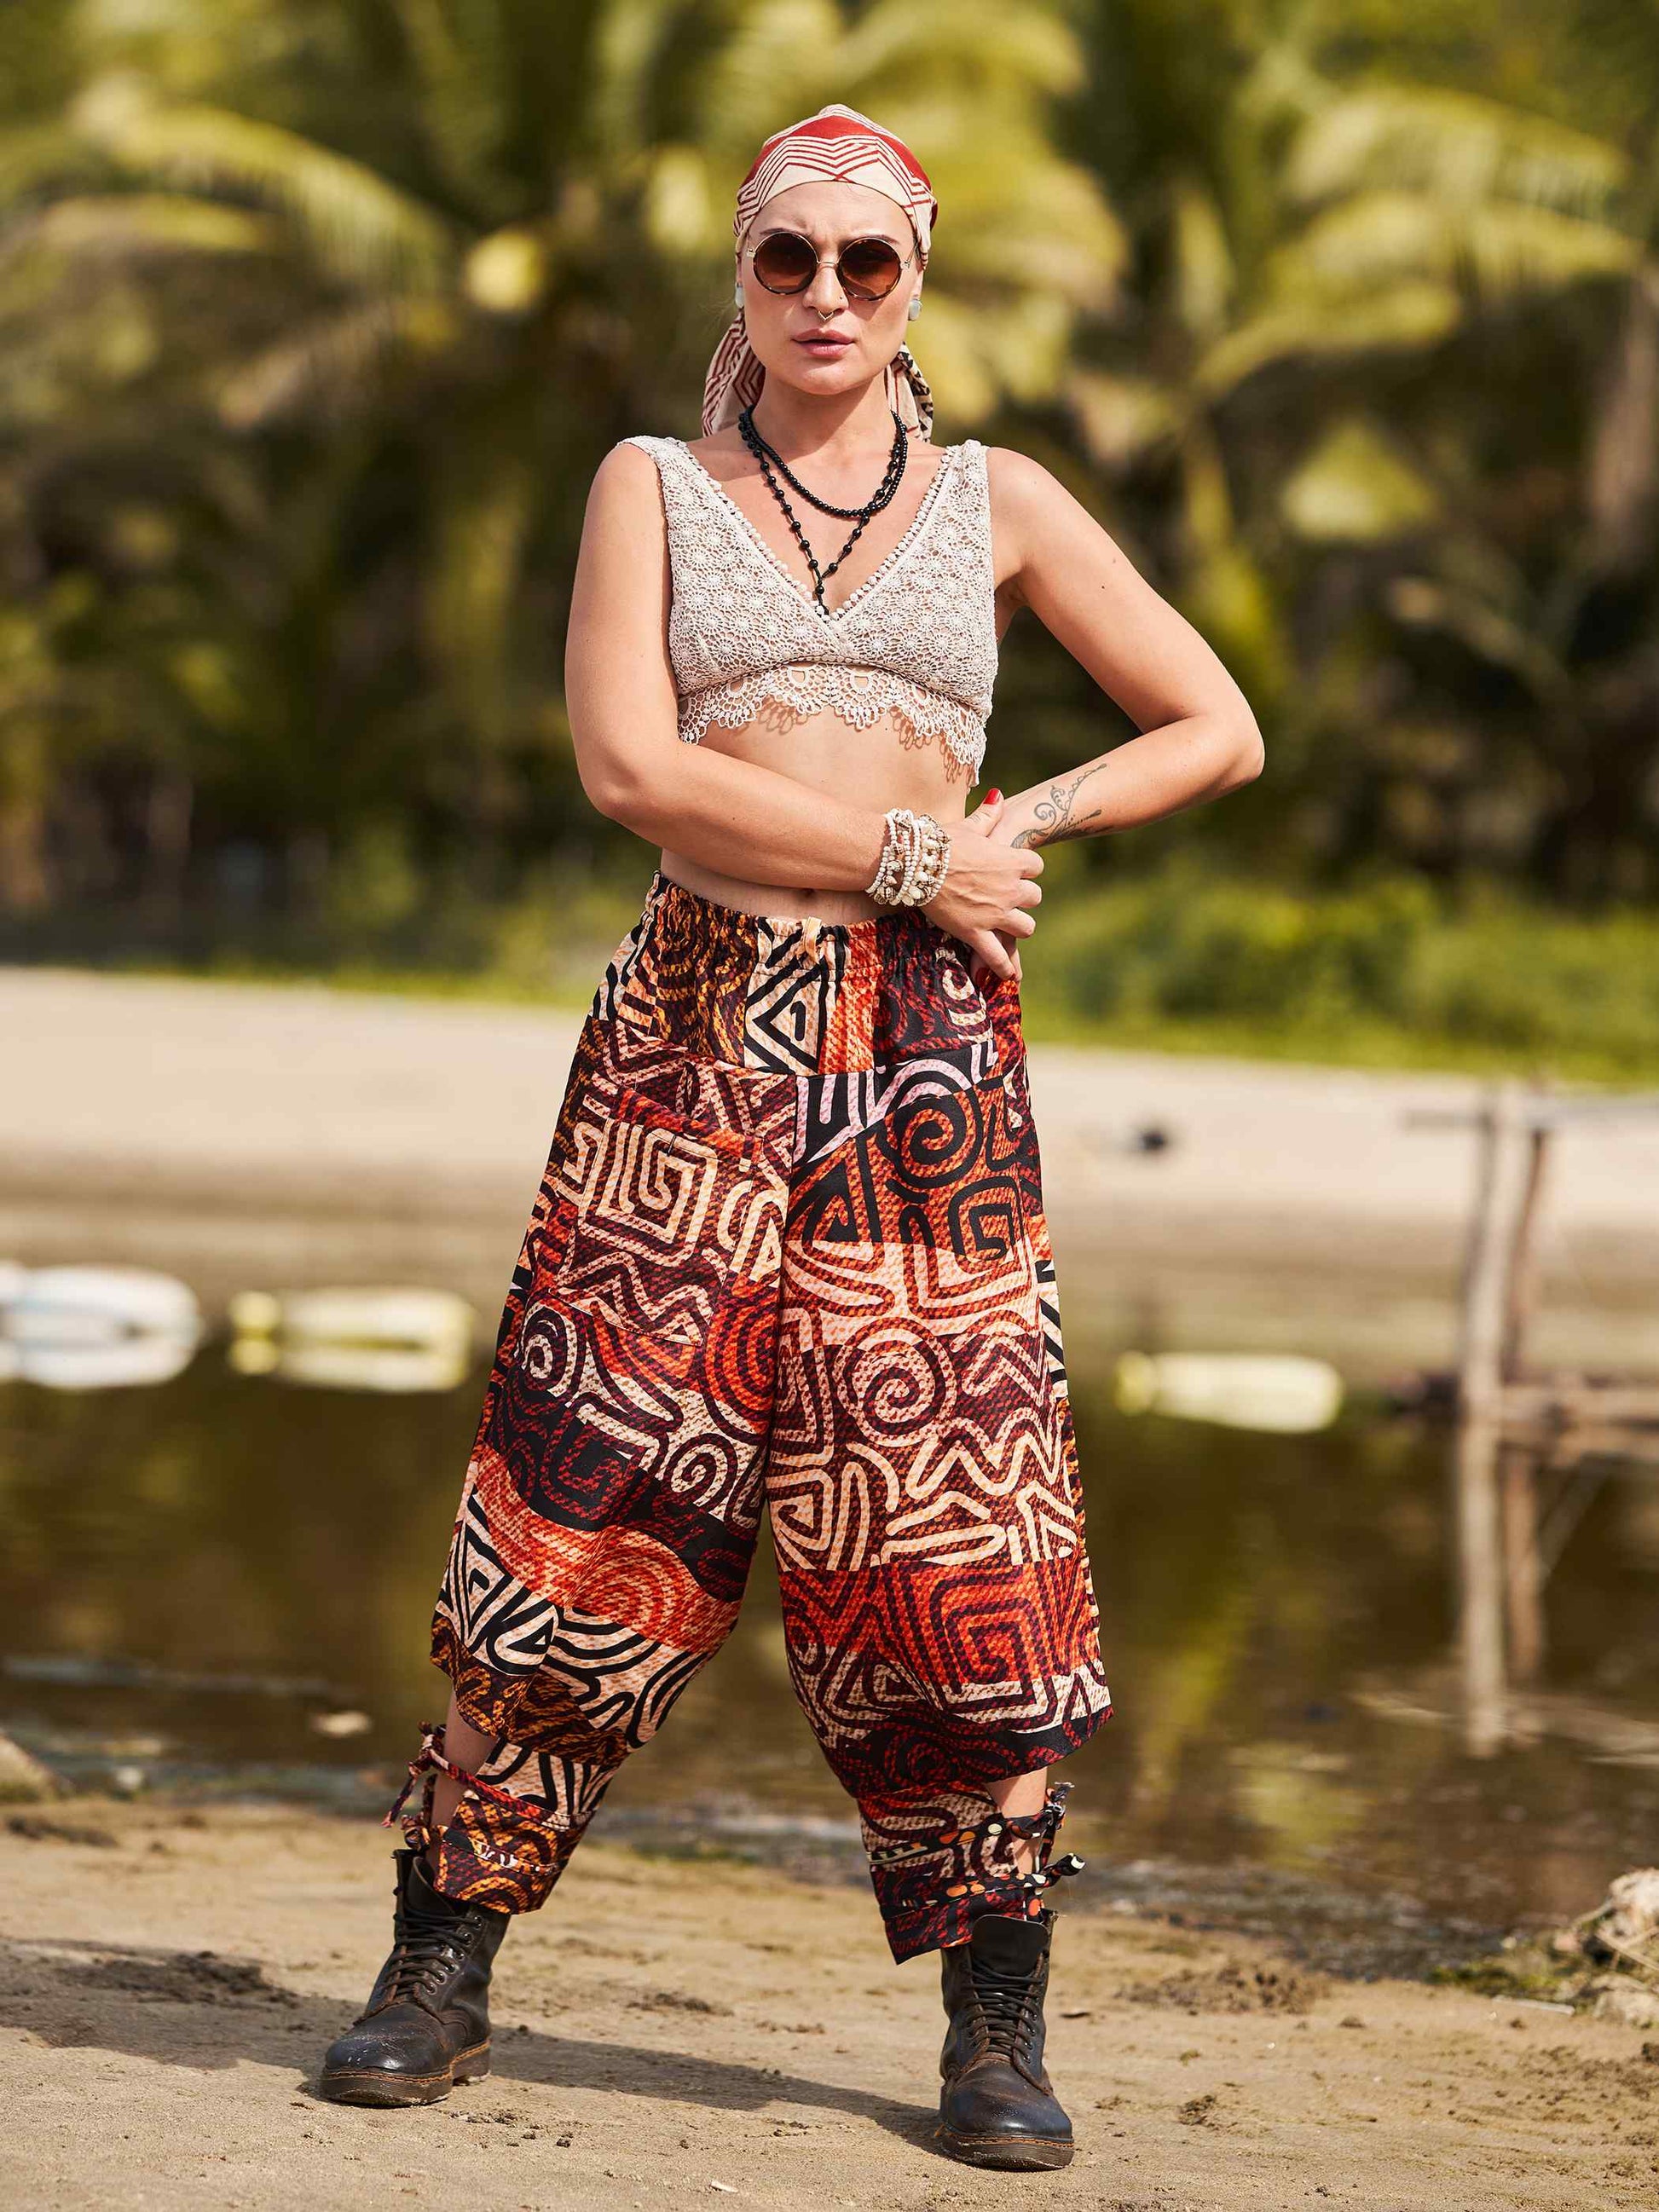 Women's Flowy Graphic Printed Hippy Harem Pants For Travel Yoga Dance